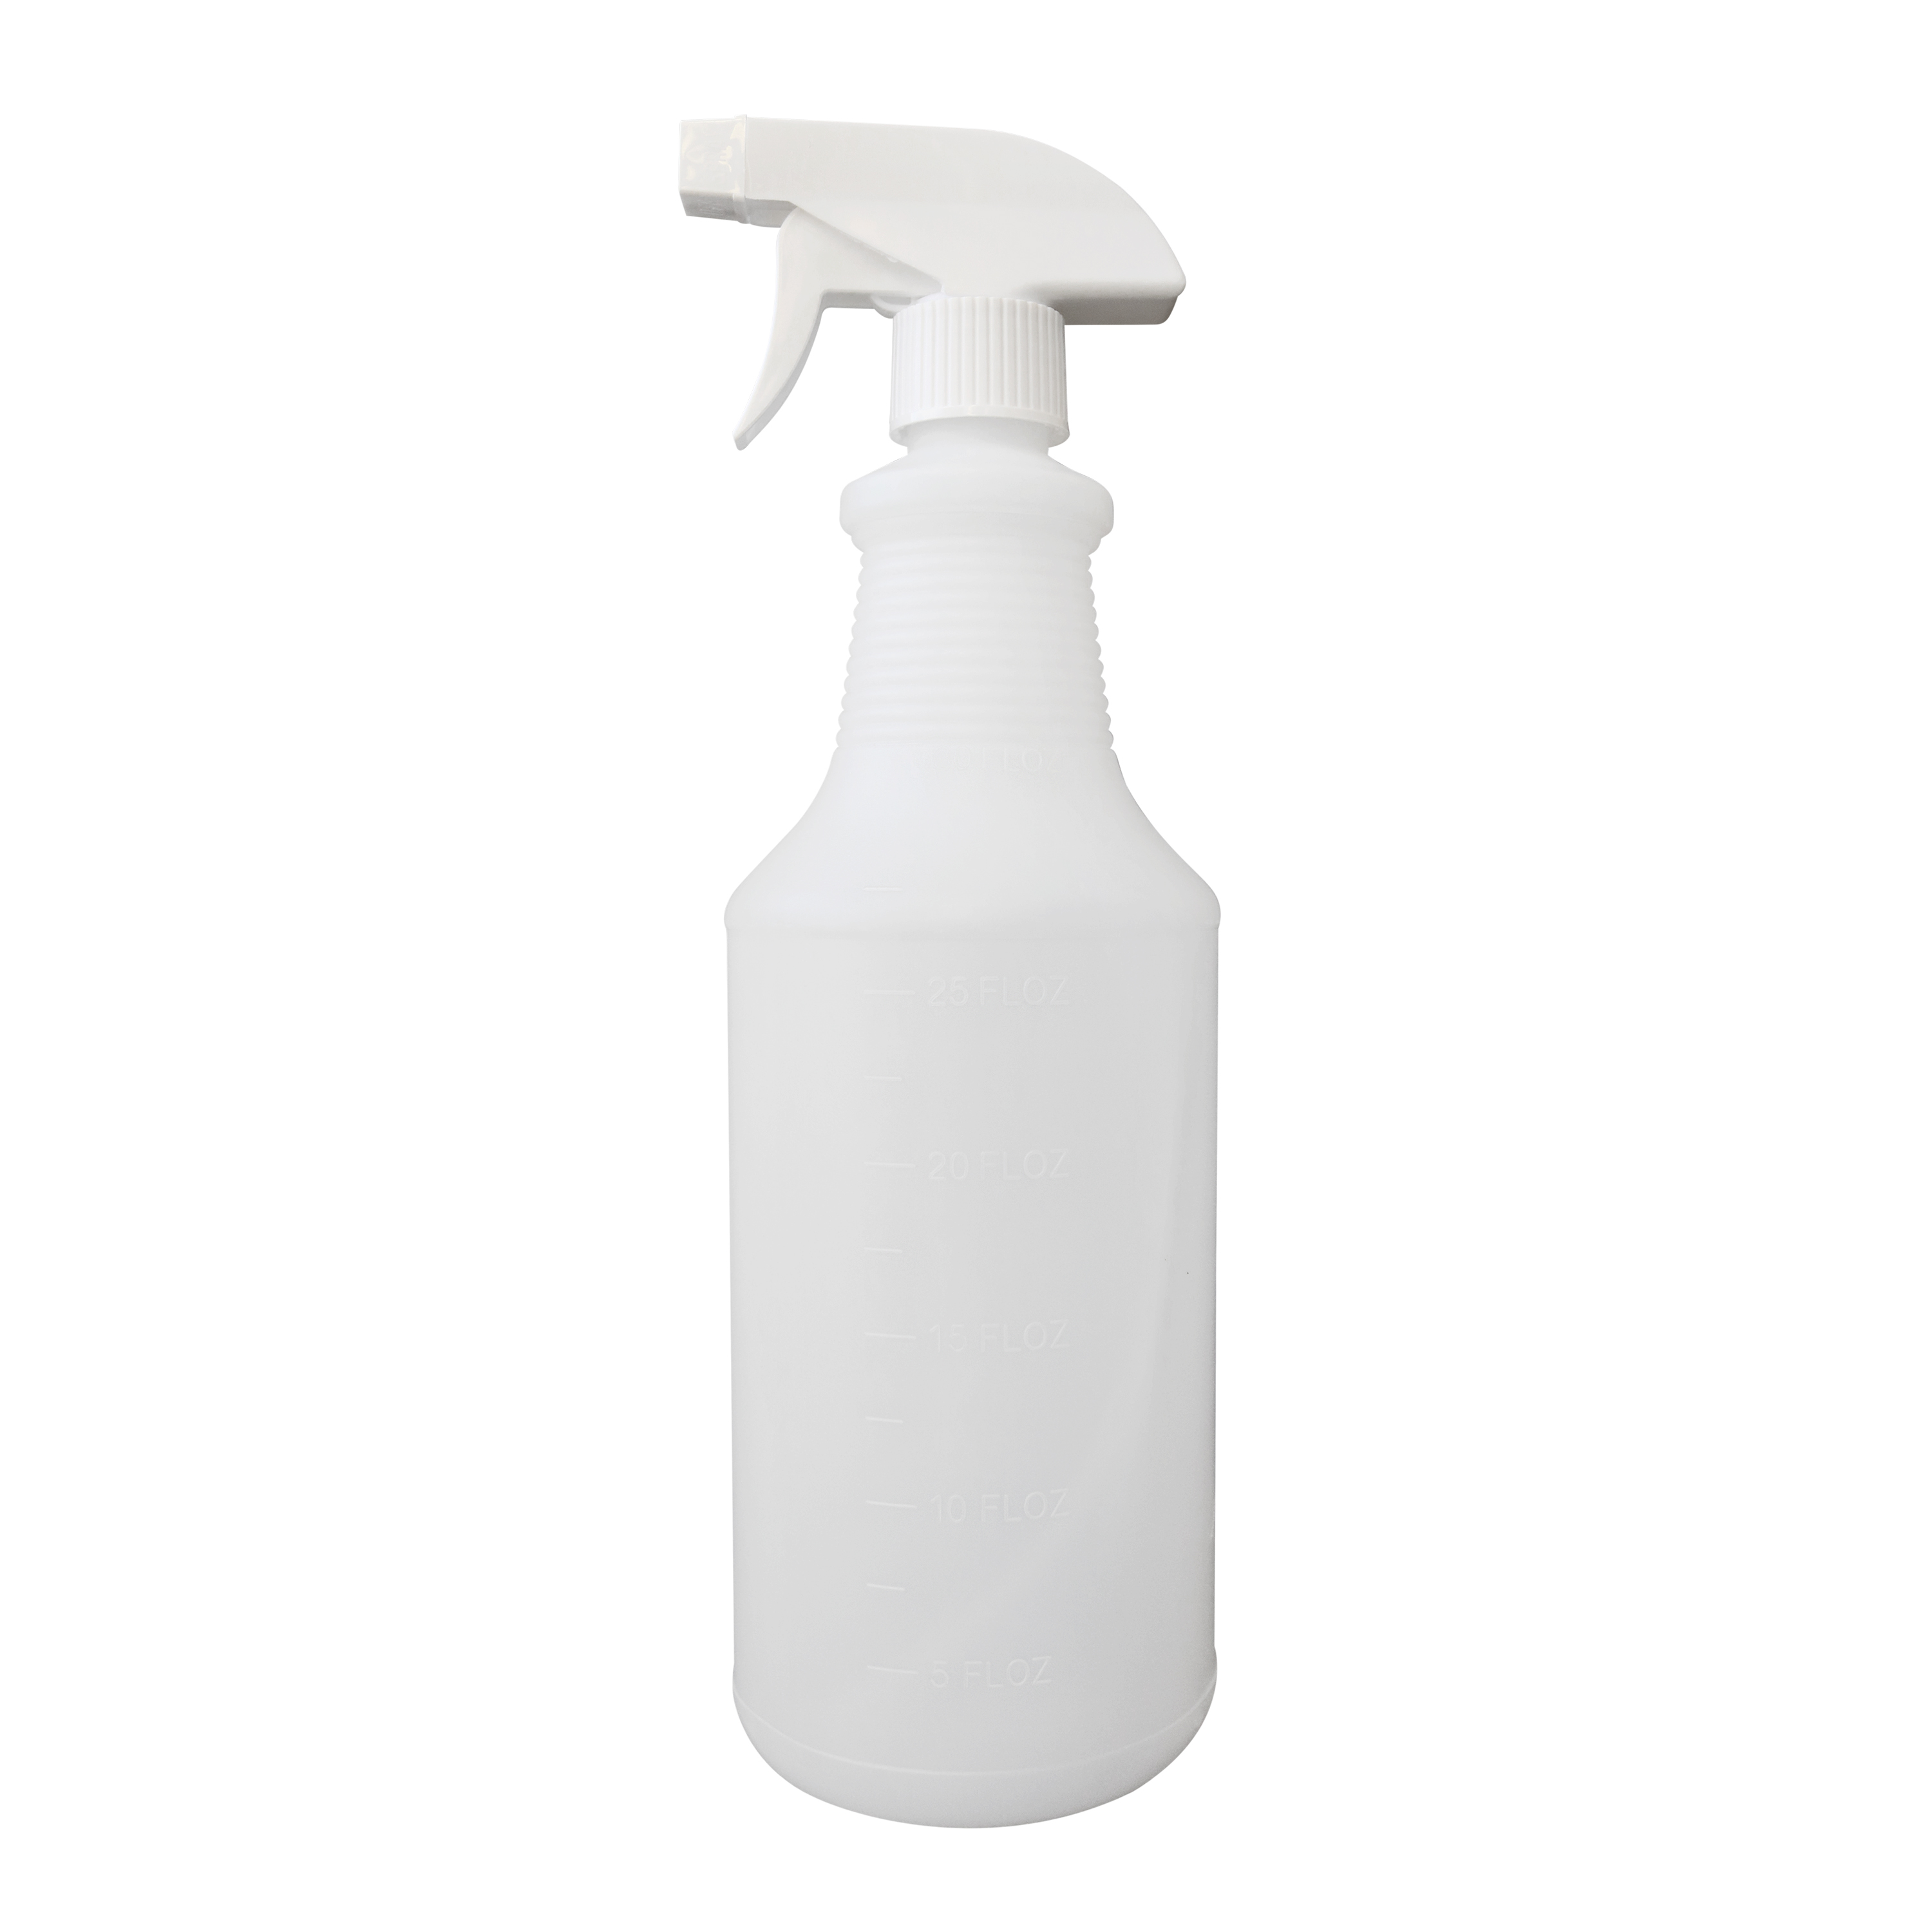 Decony 4 Pc. Empty Spray Bottles for Cleaning Solutions- Heavy Duty Spray  Bottle with Measurements and Adjustable Nozzle (Mist & Stream Mode) - 32  Oz.